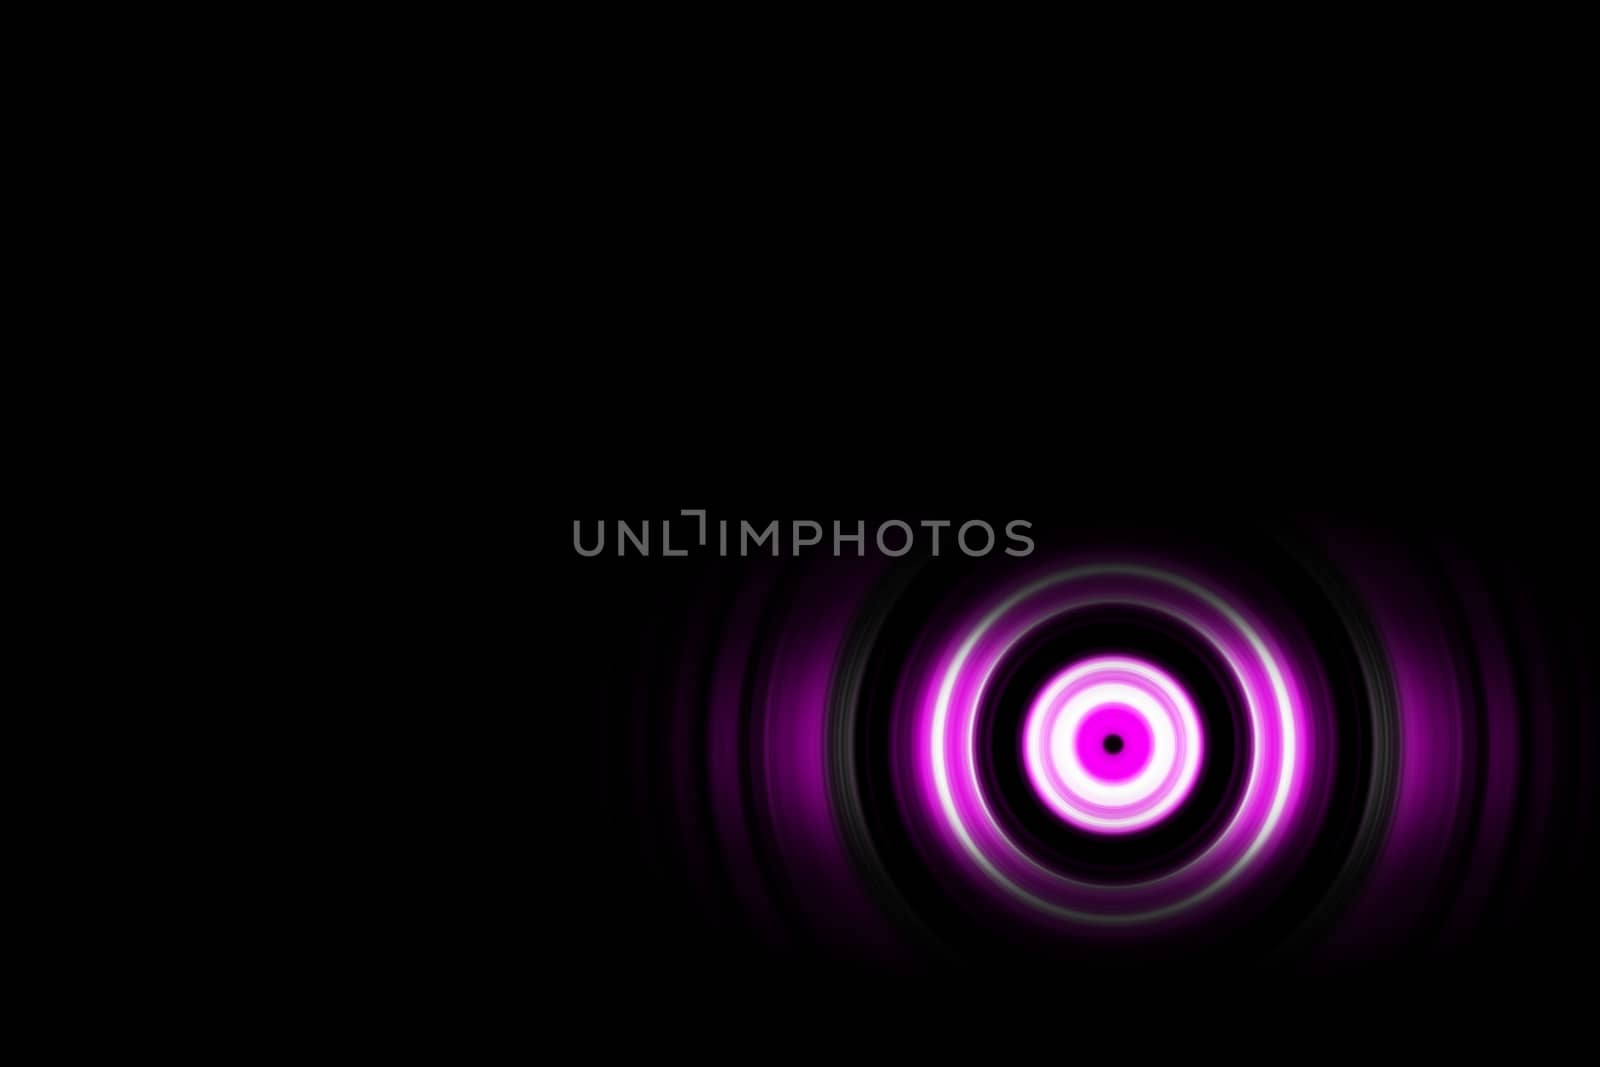 Light purple digital sound wave or circle signal, abstract backg by mouu007